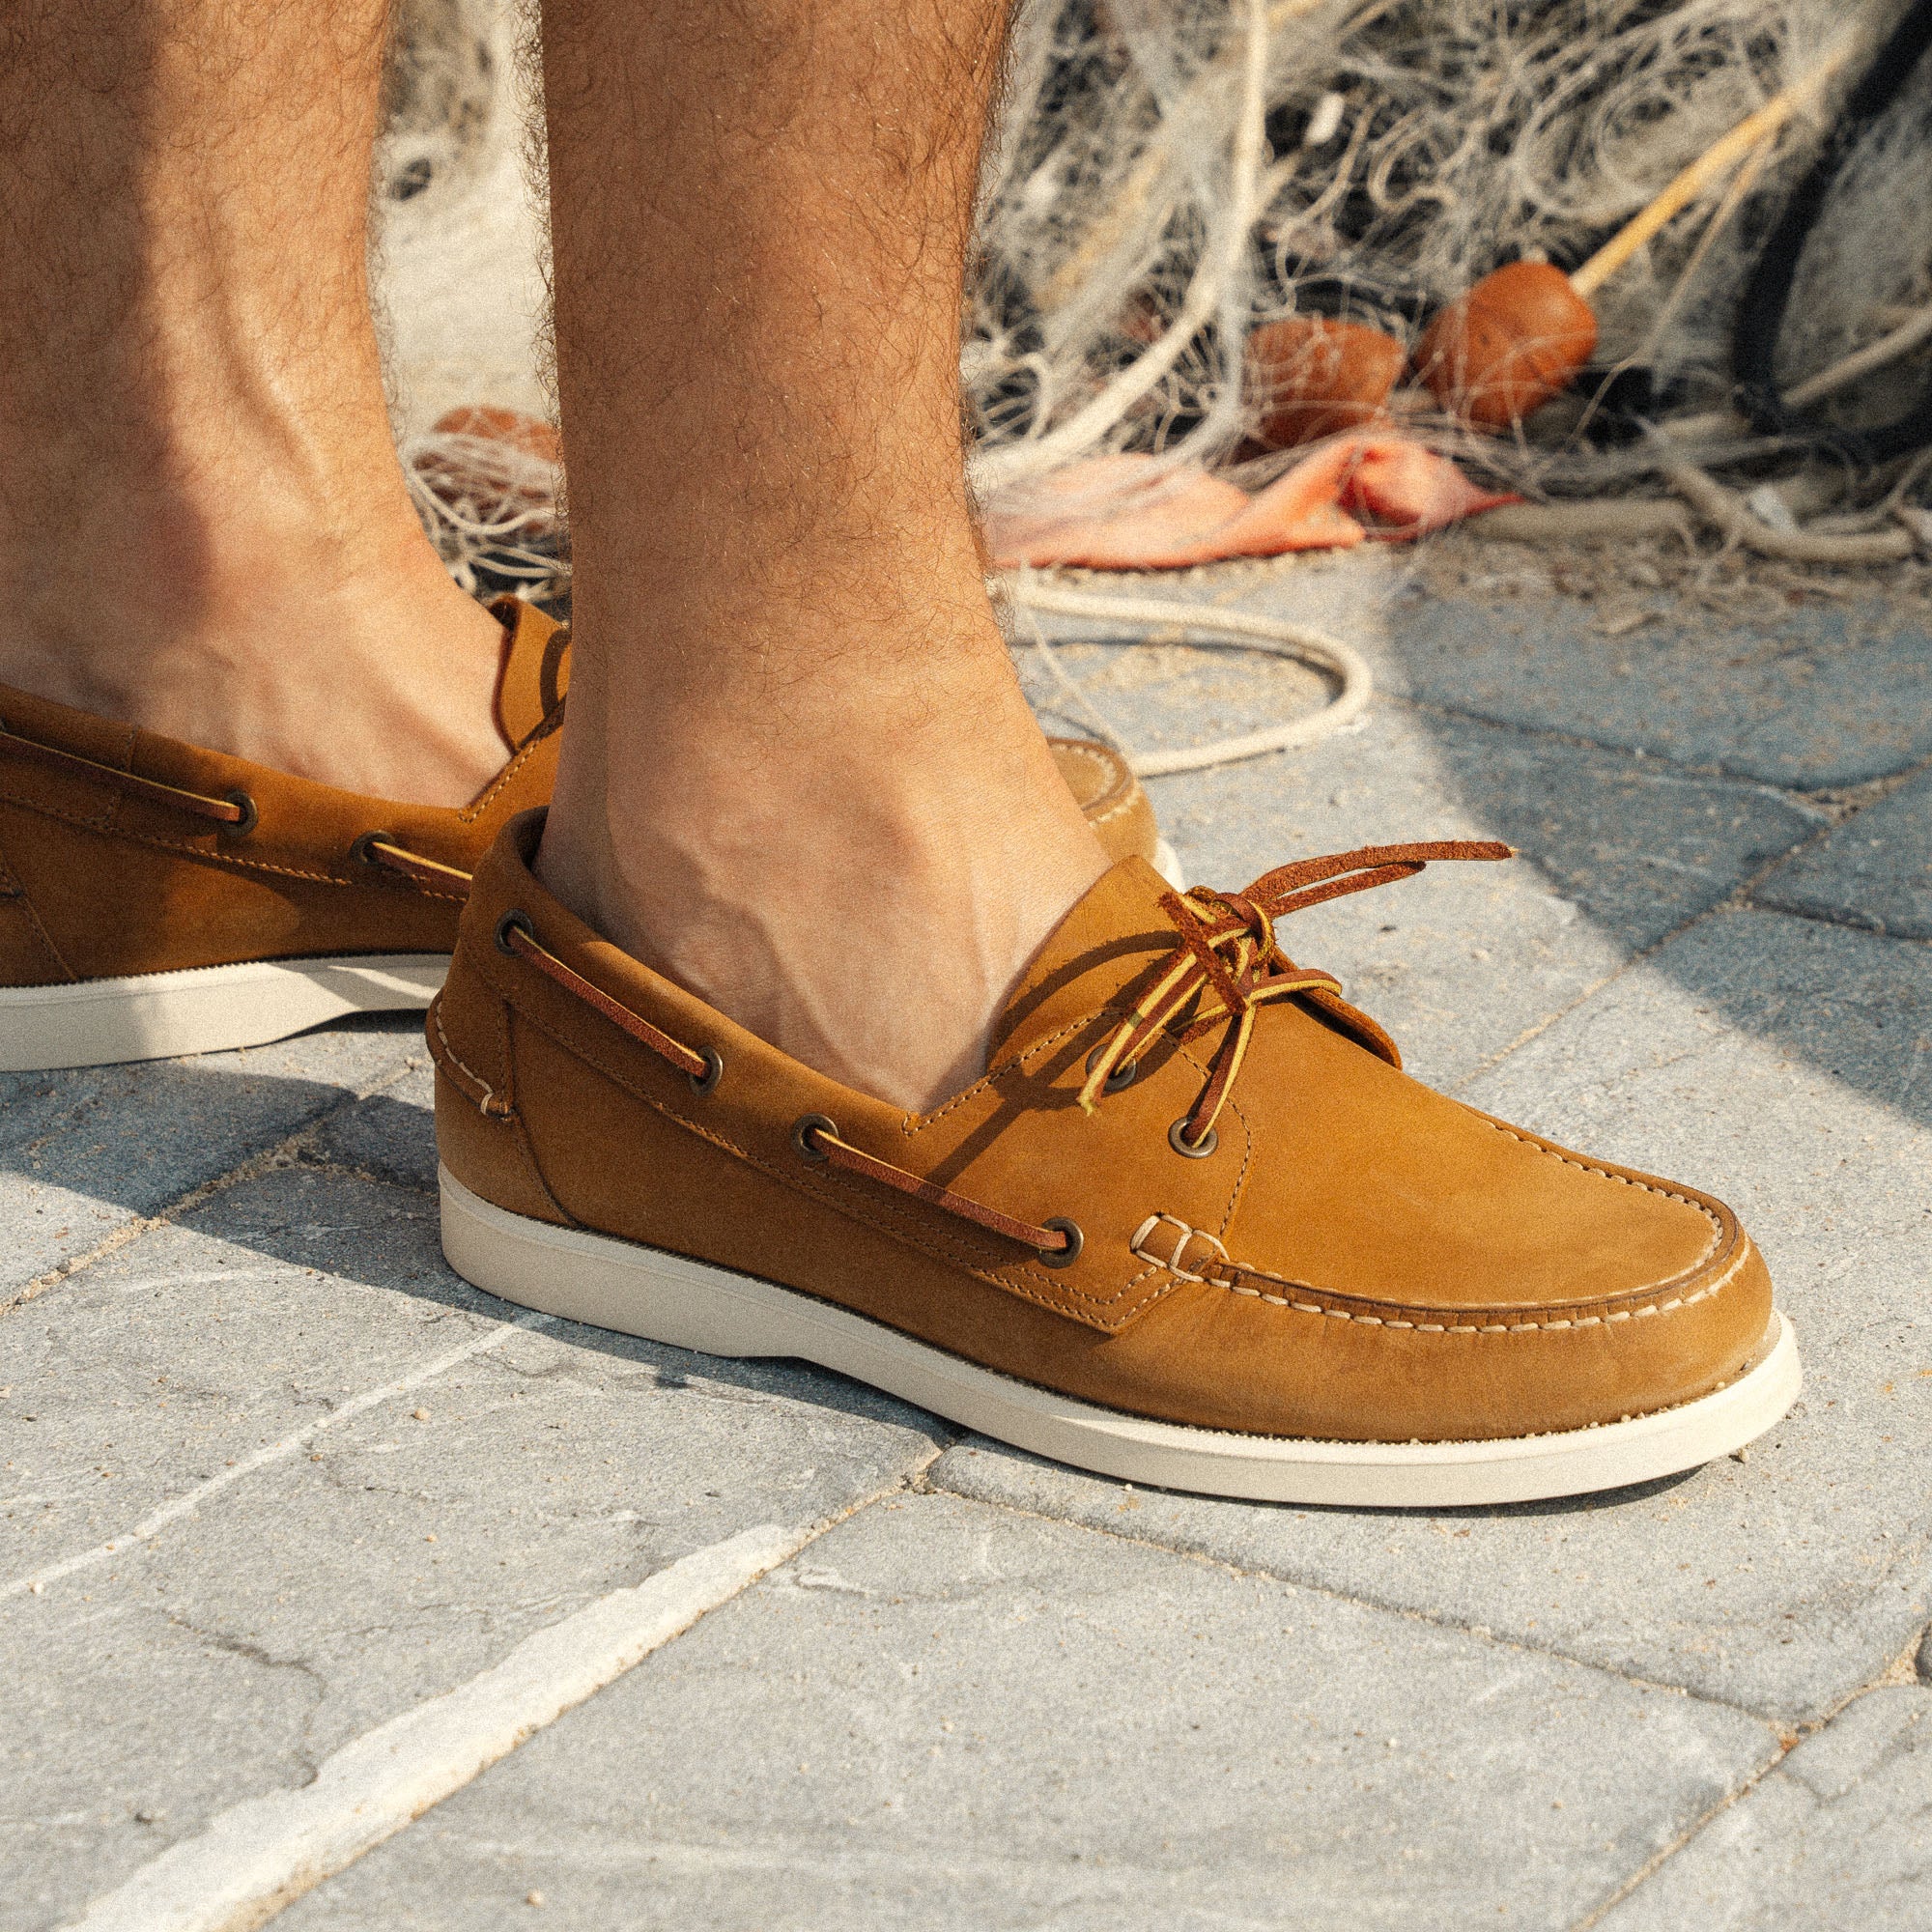 Semi-Formal Styling with Boat Shoes